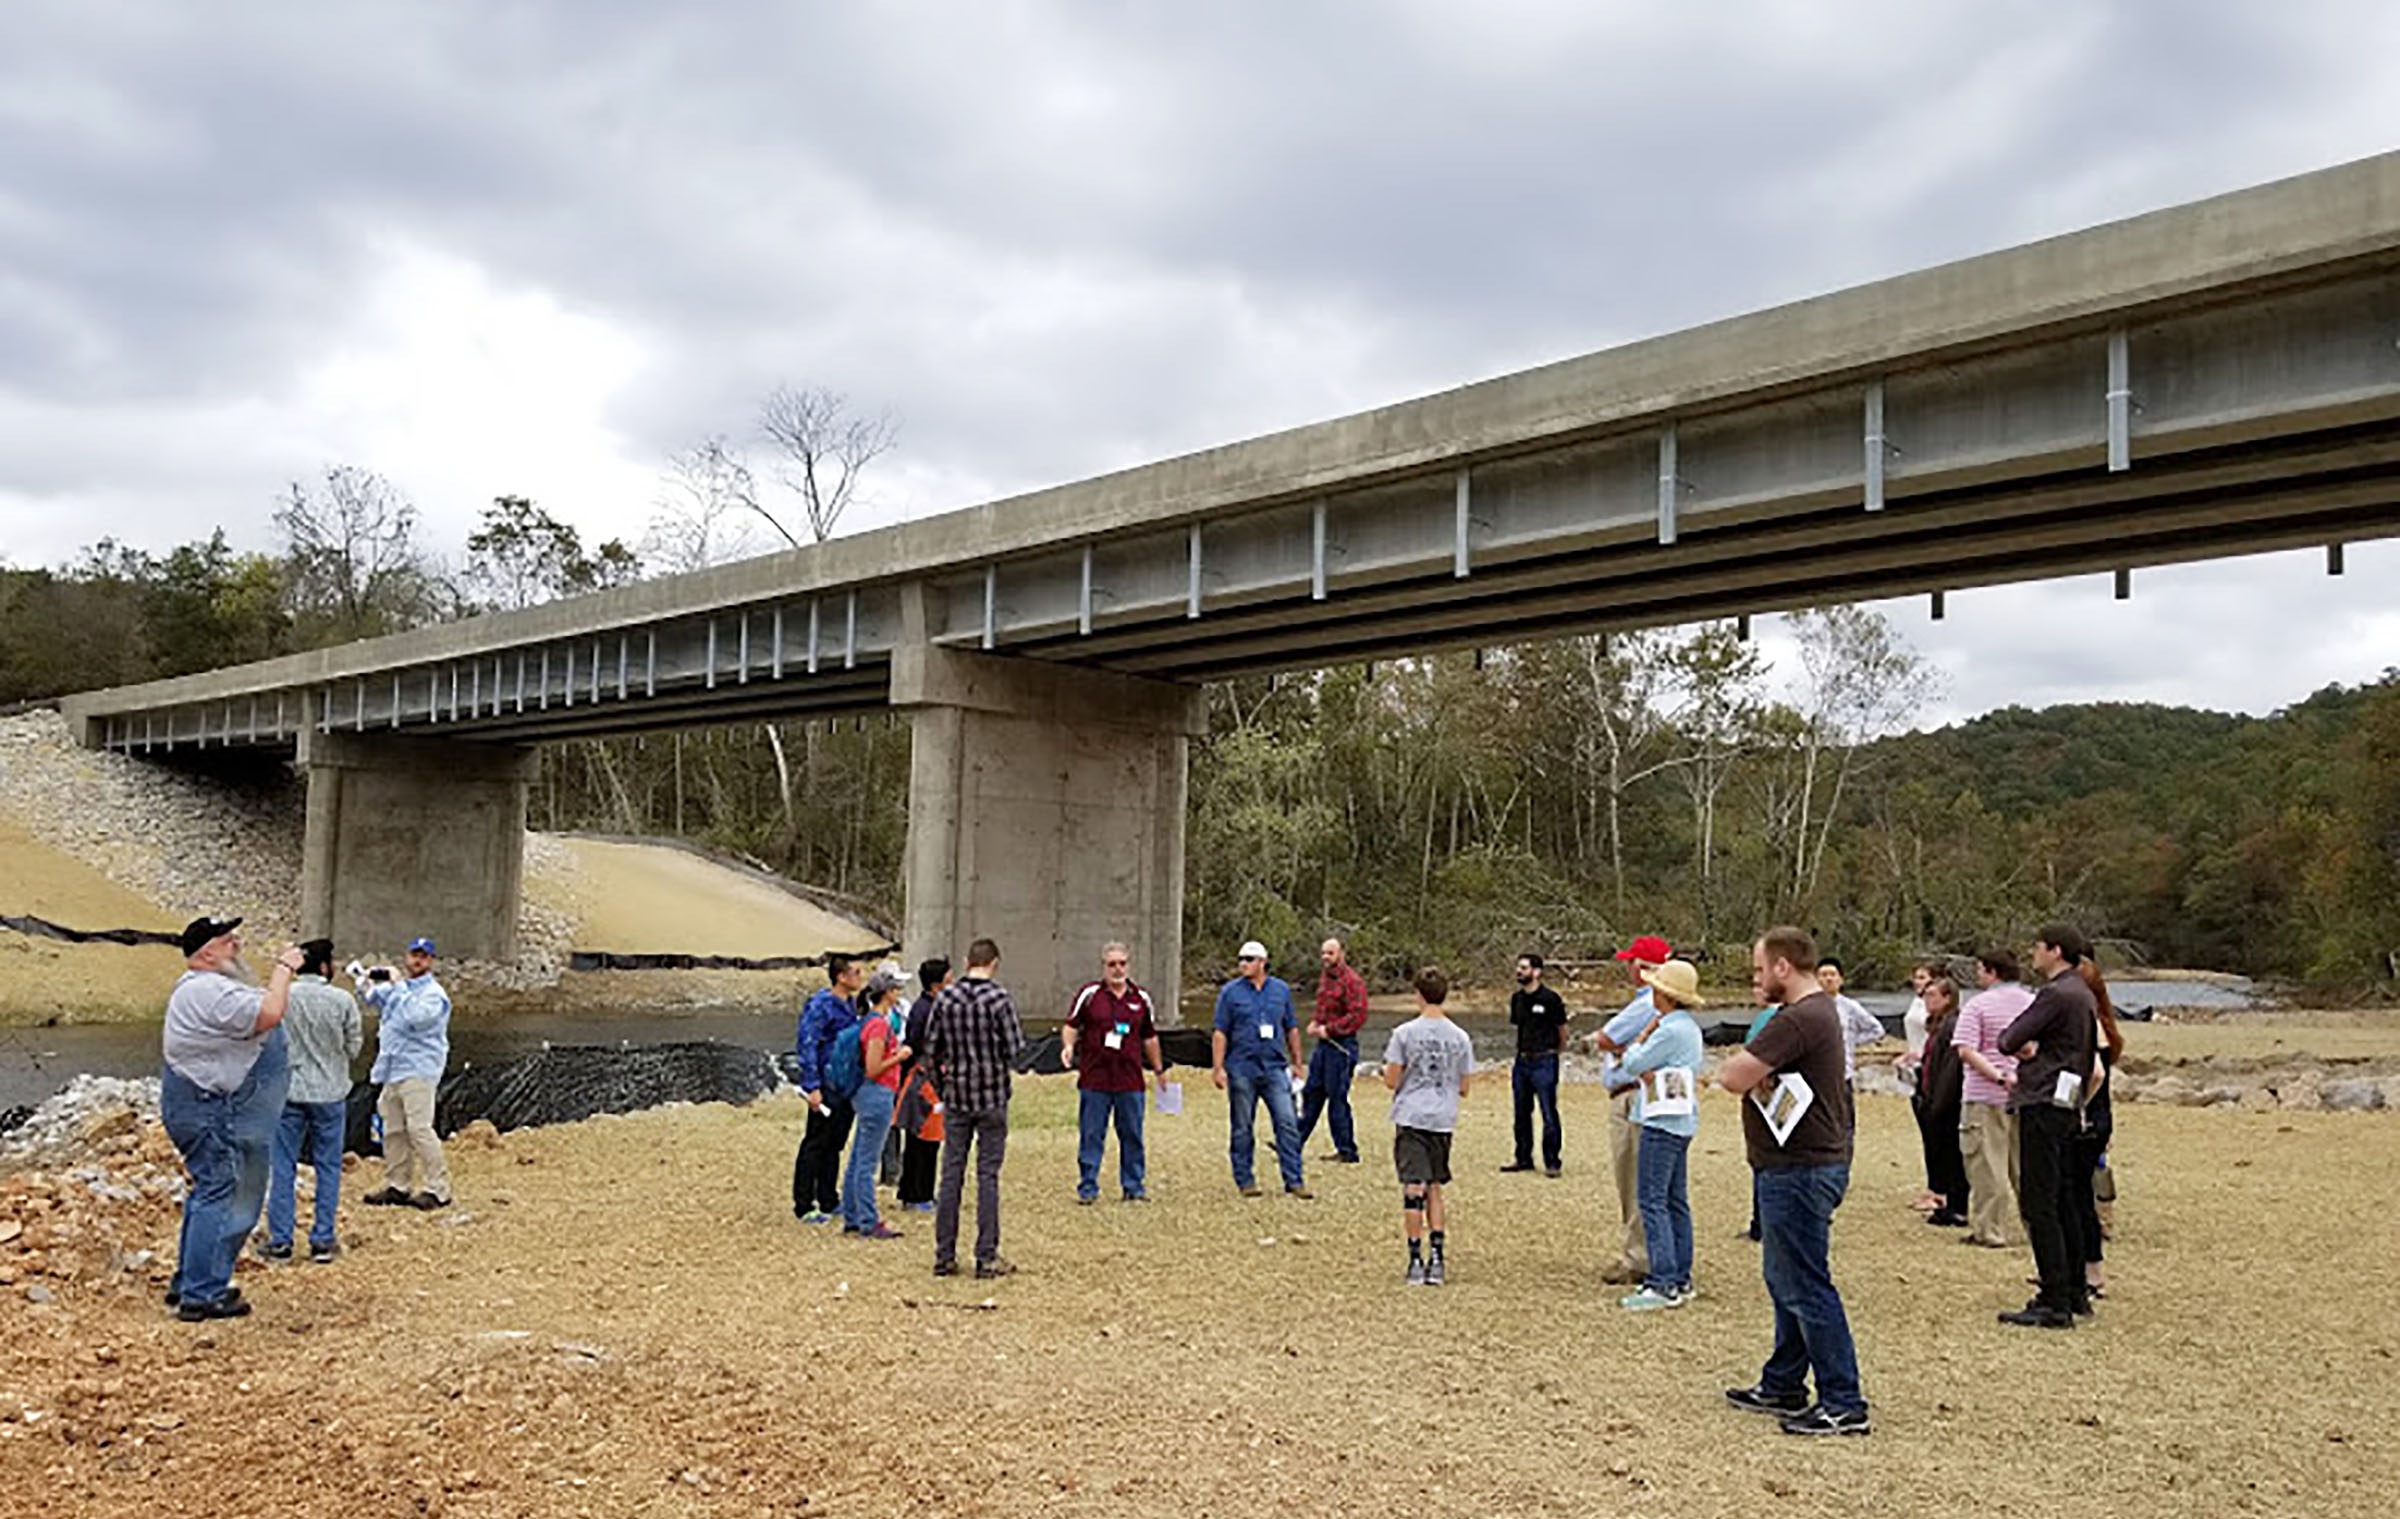 SEVERAL OF THOSE ATTENDING the American Association of Geographers-West Lakes Division (AAG-WLD) annual meeting gathered with Missouri State University Distinguished Professor Dr. Robert Pavlowsky near the new Highway CC bridge over the North Fork River to discuss global warming and its effects on flooding in the Missouri Ozarks. The original bridge, which stood over 40 feet above the river, was washed away by flash flooding in April this year. (Photo provided)